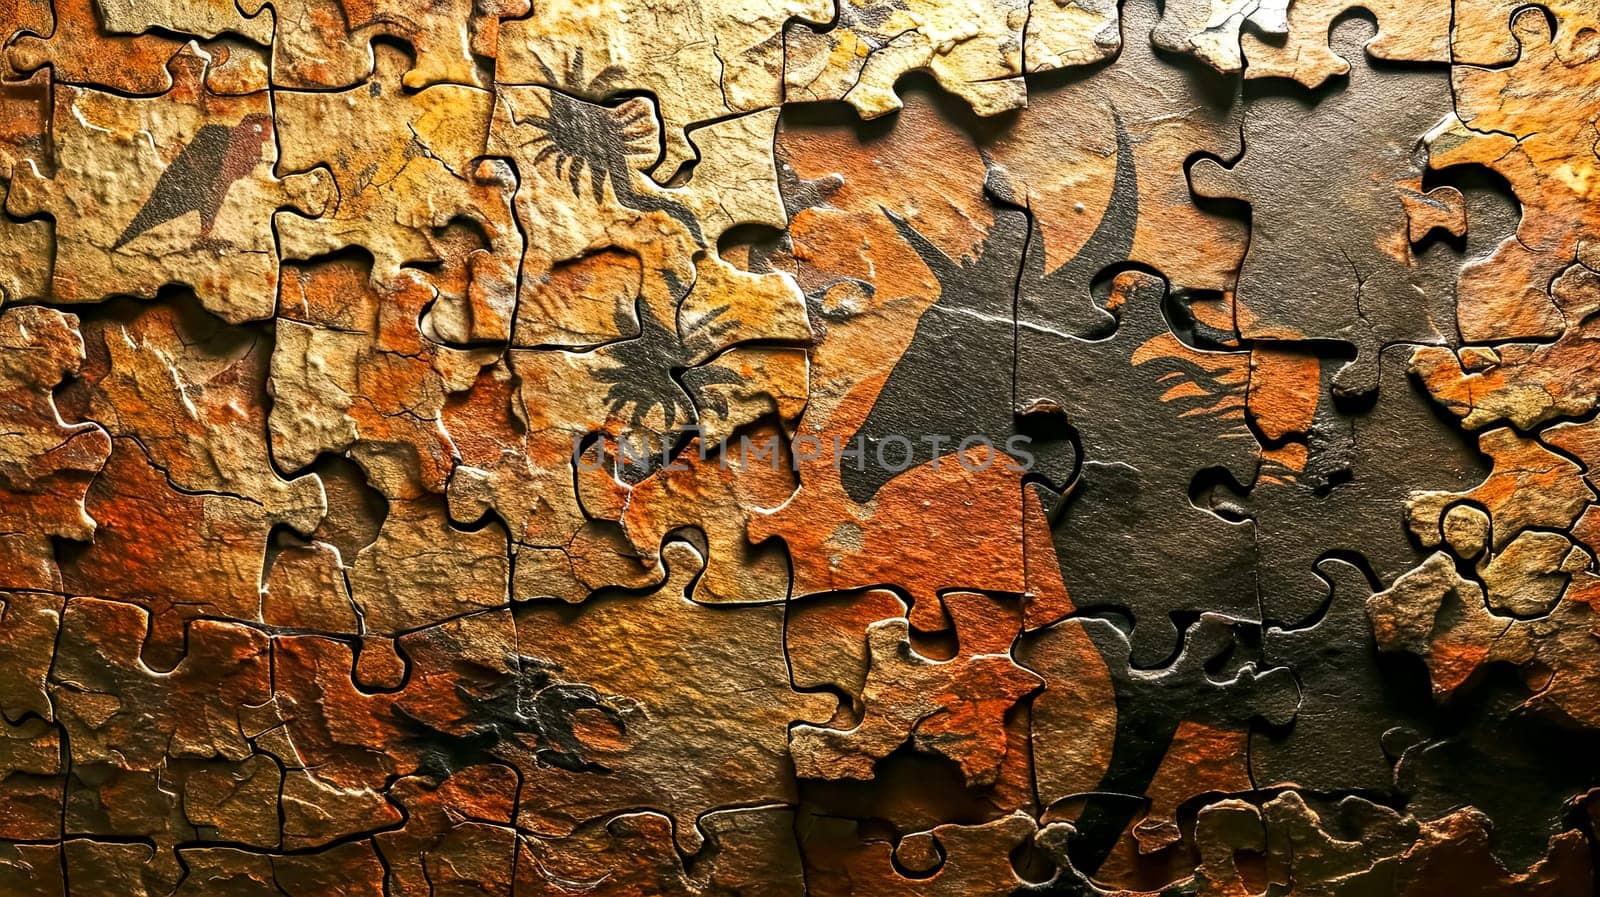 Cave art themed jigsaw puzzle with animal silhouettes and tribal motifs by Edophoto